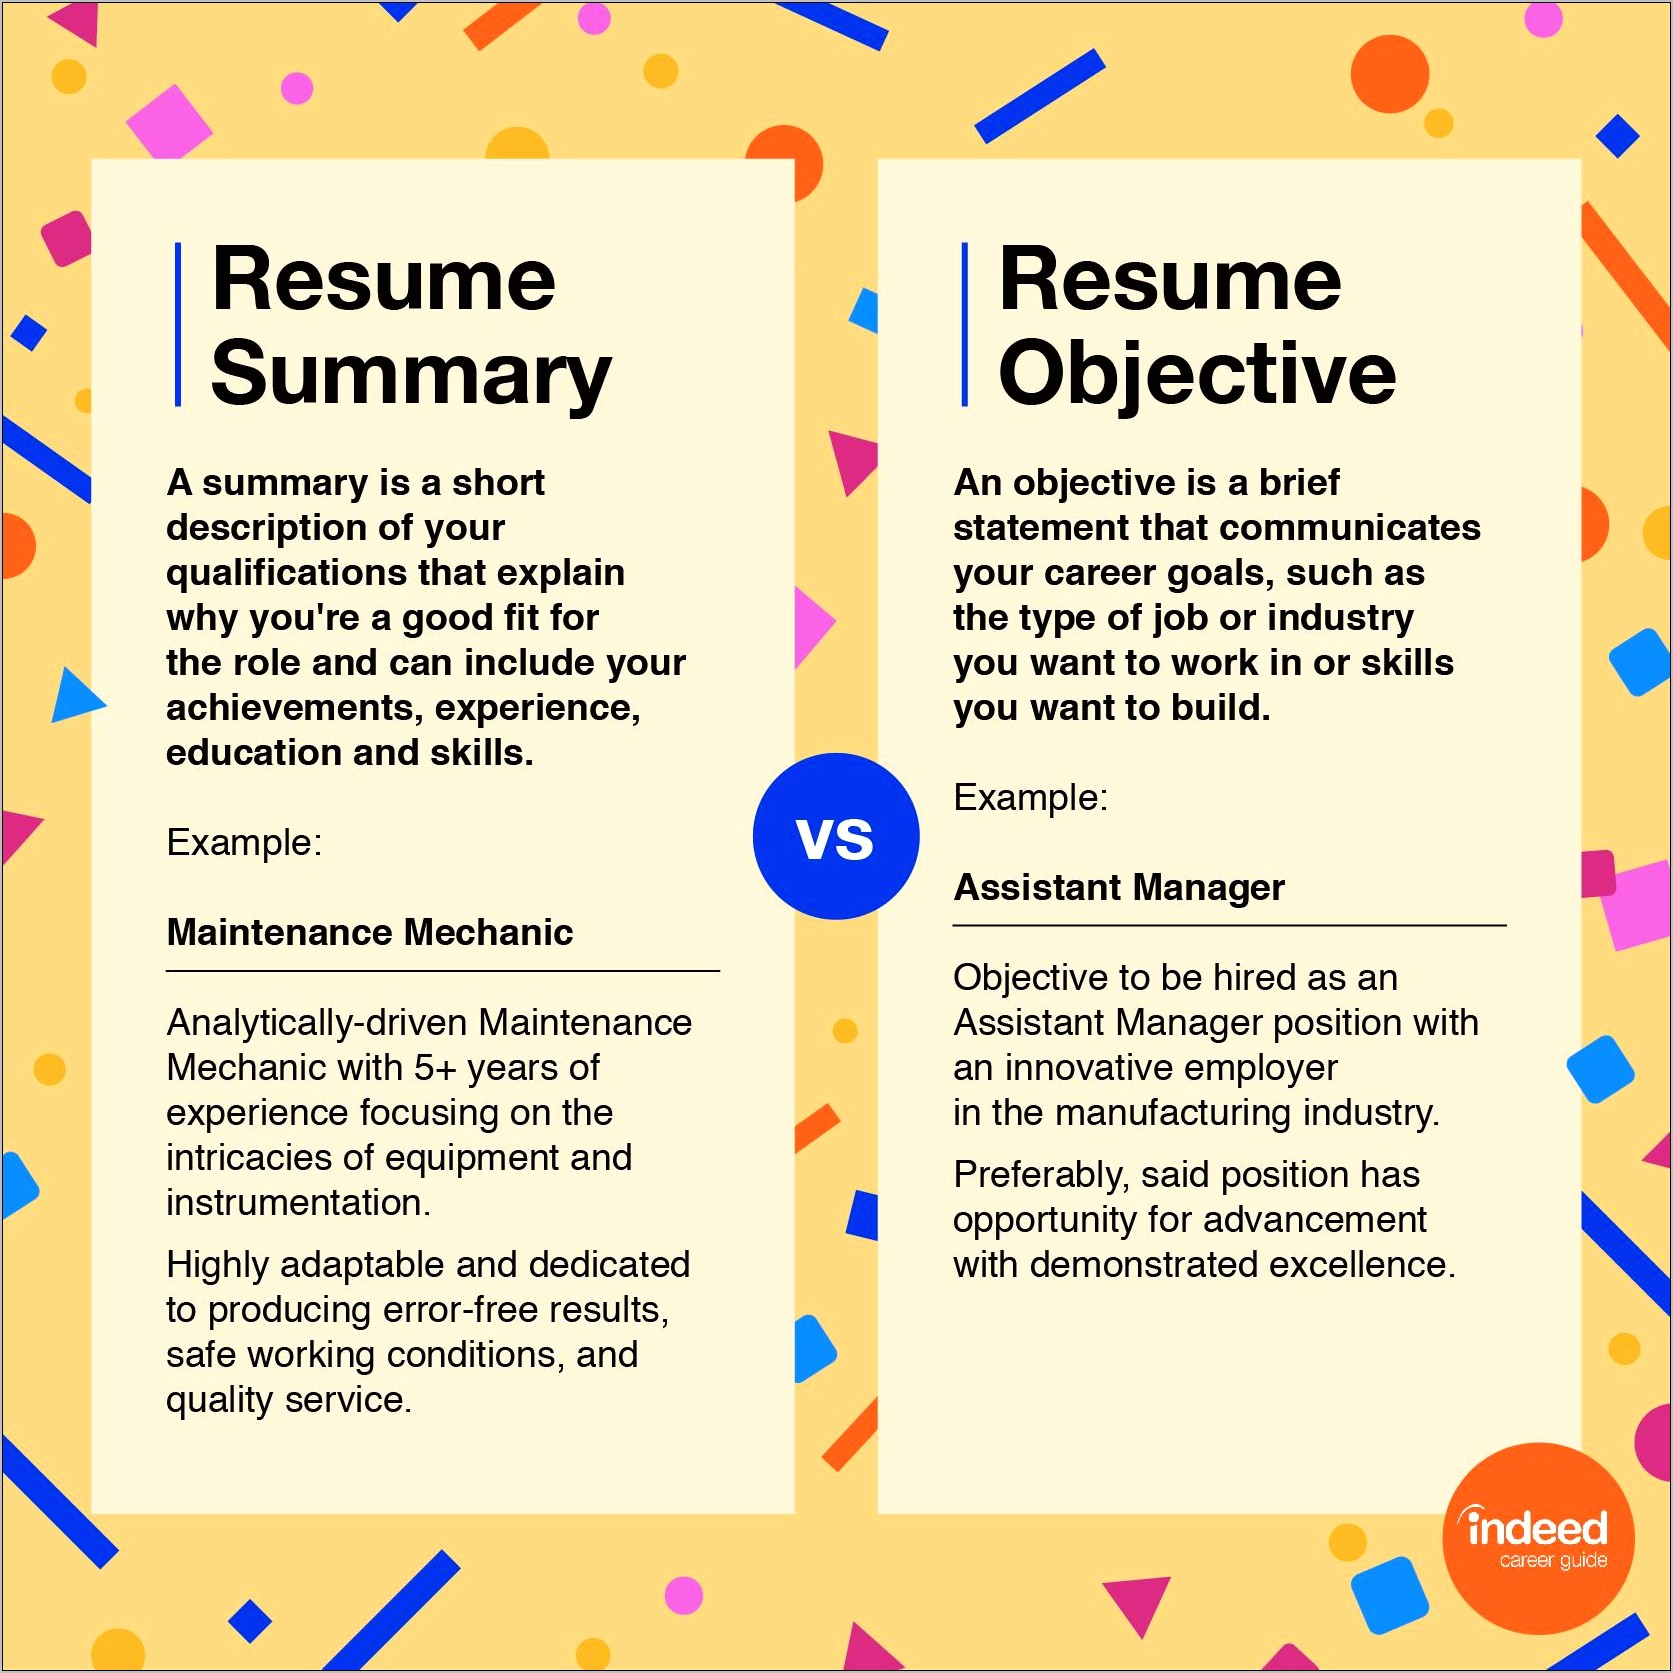 Resumes Need Objective Statement 2018